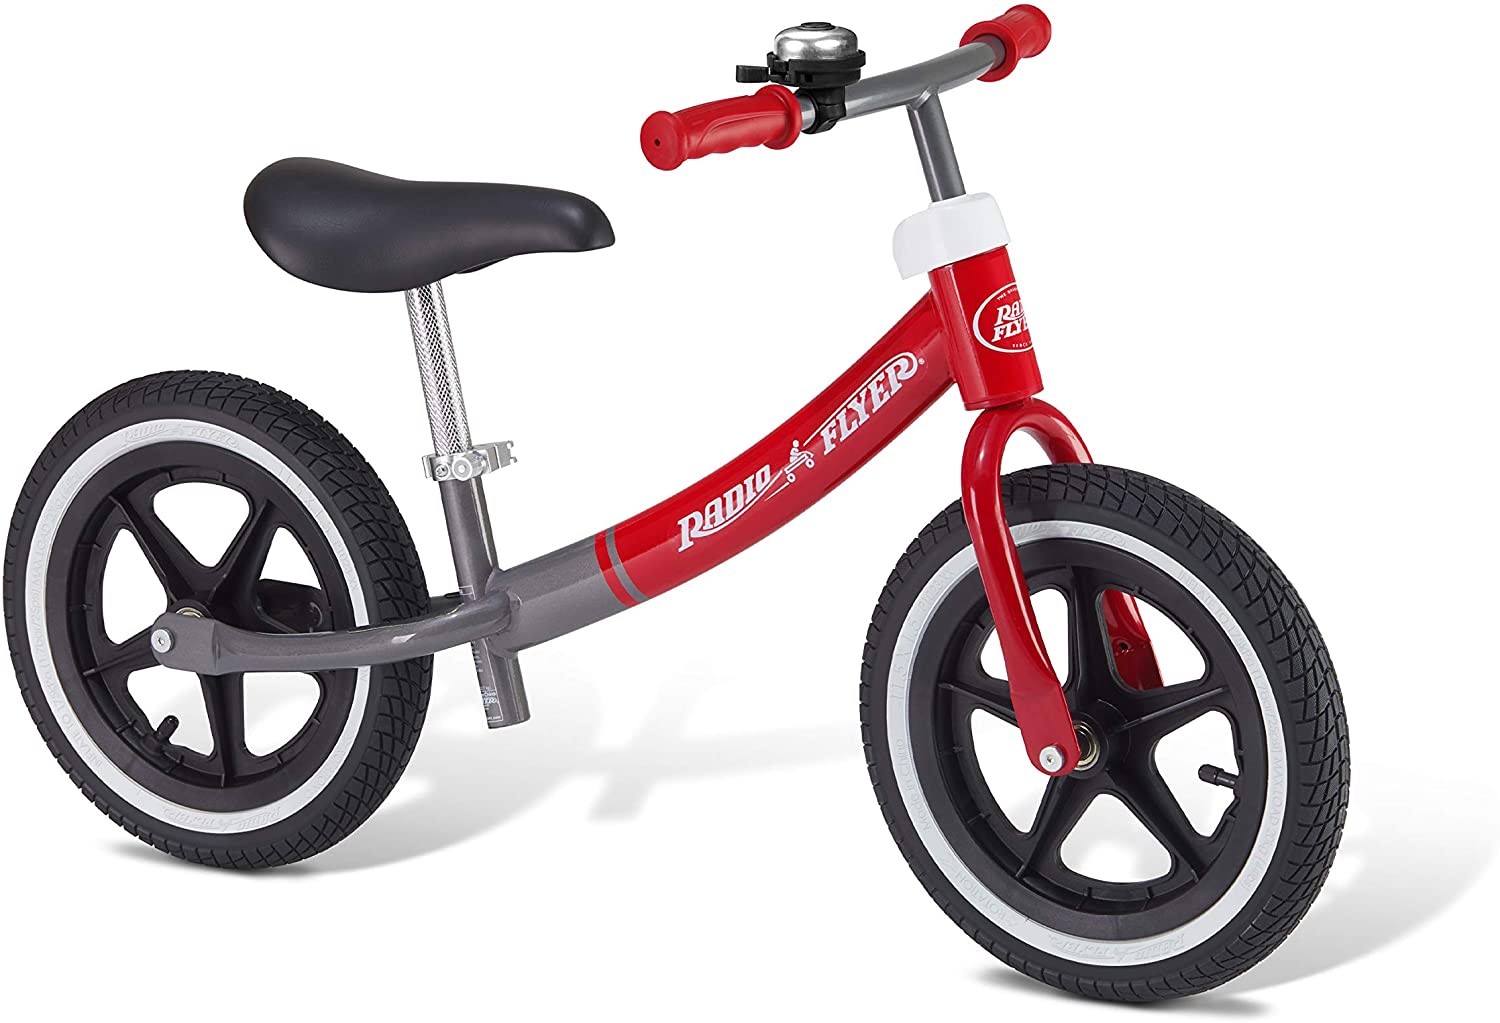 No Pedal Push Bike with Rubber Tires for Kids Ages 2,3,4 and 5 Years Old Kikstnd Balance Bike 